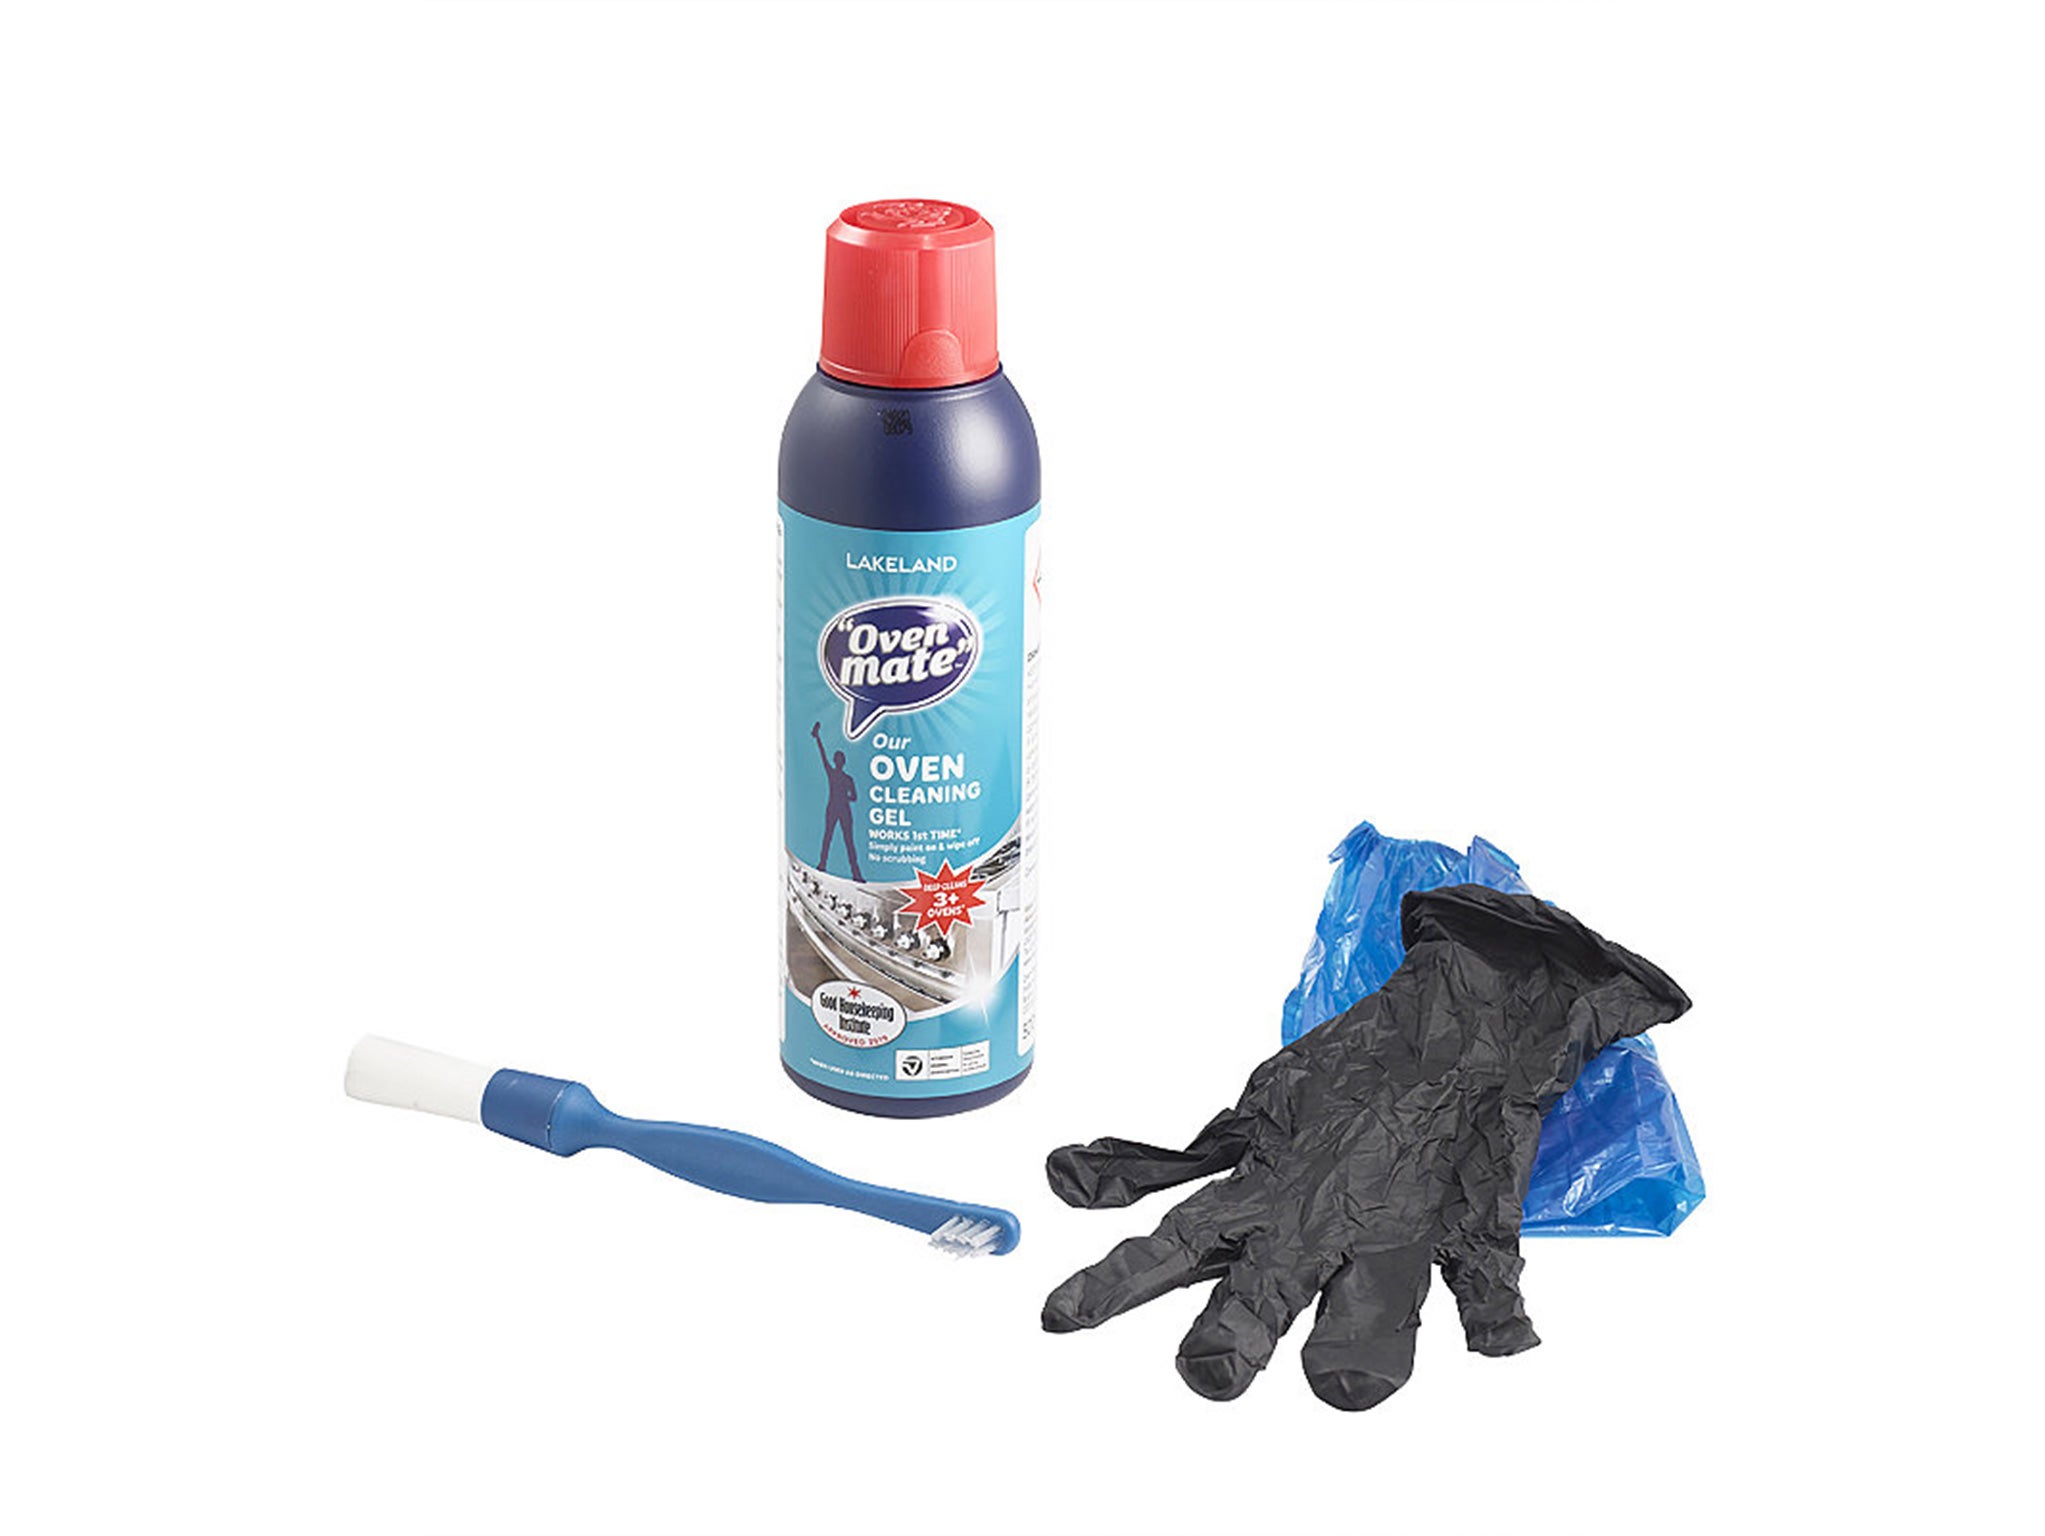 Lakeland Oven Mate Oven Cleaning Gel 500ml Brush and Gloves Cleaning Kit
